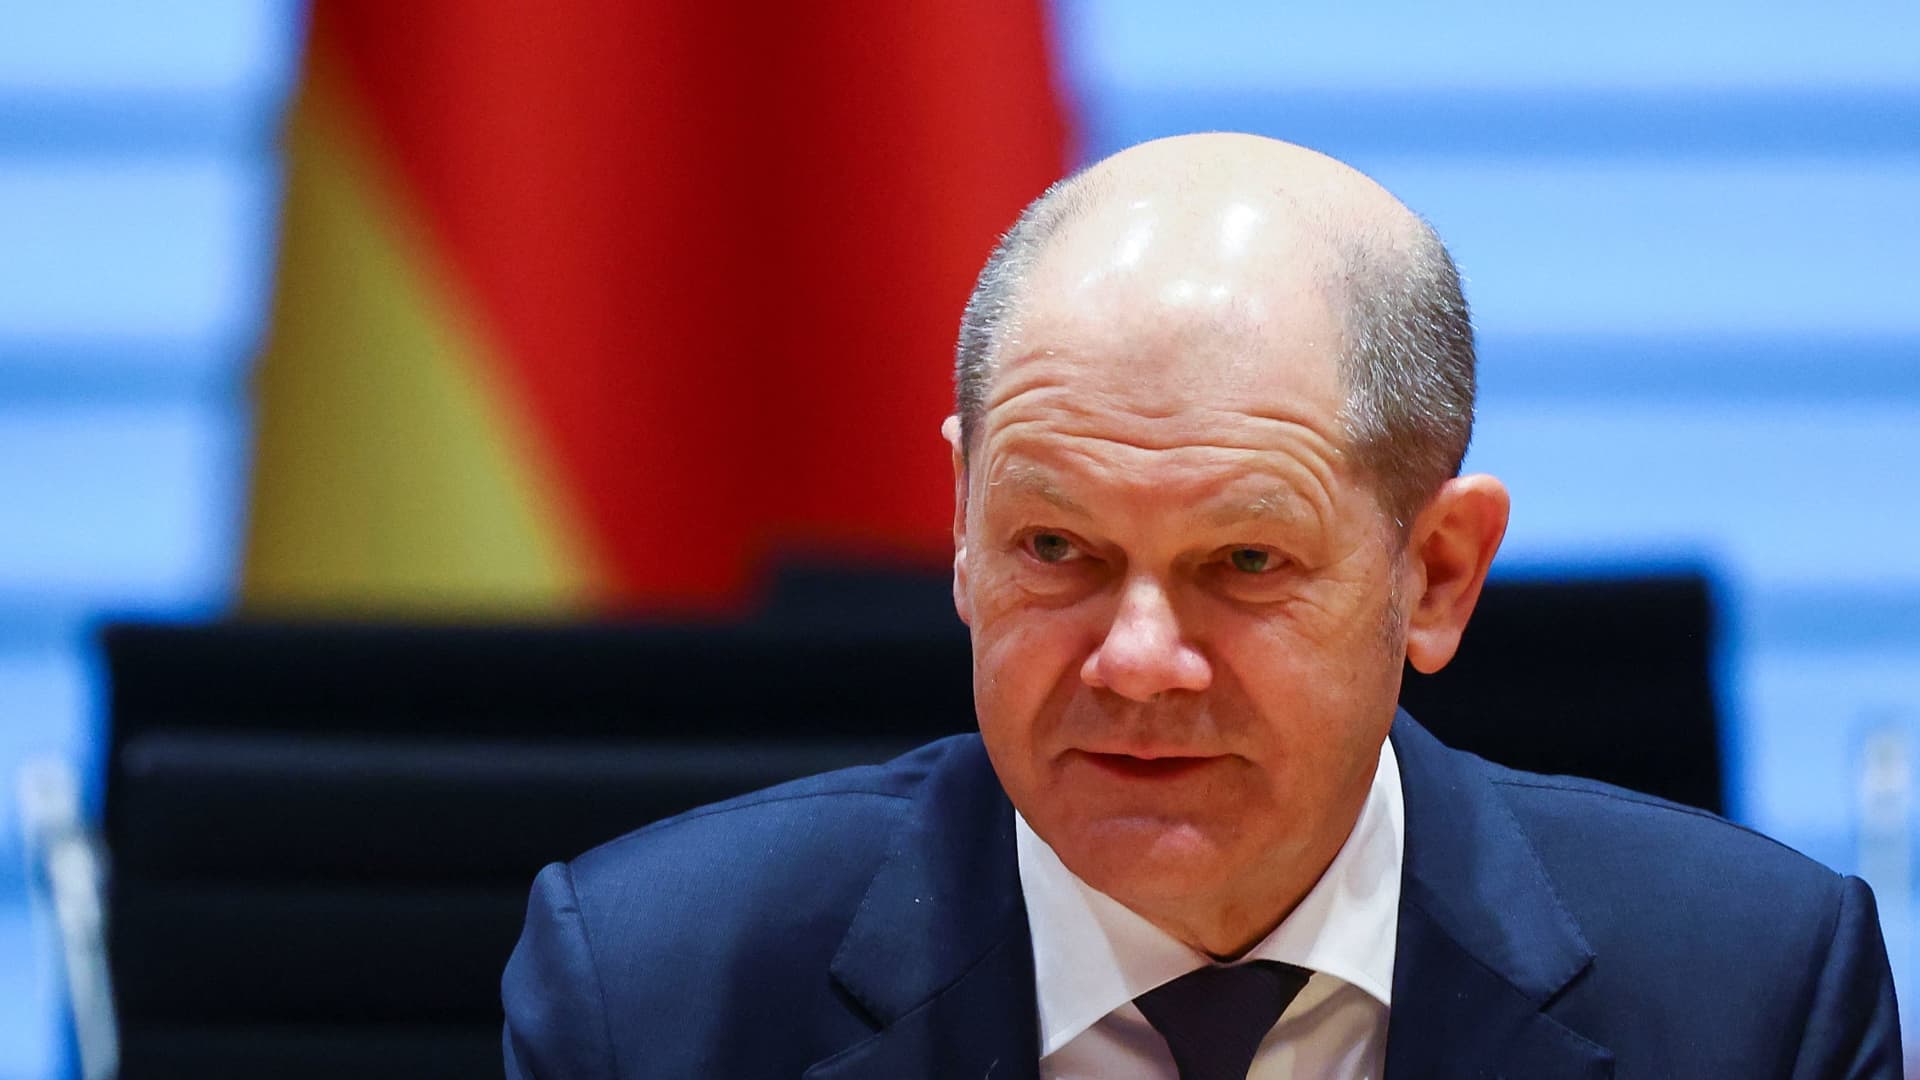 German Chancellor Olaf Scholz looks on before the weekly cabinet meeting in Berlin, Germany April 6, 2022.